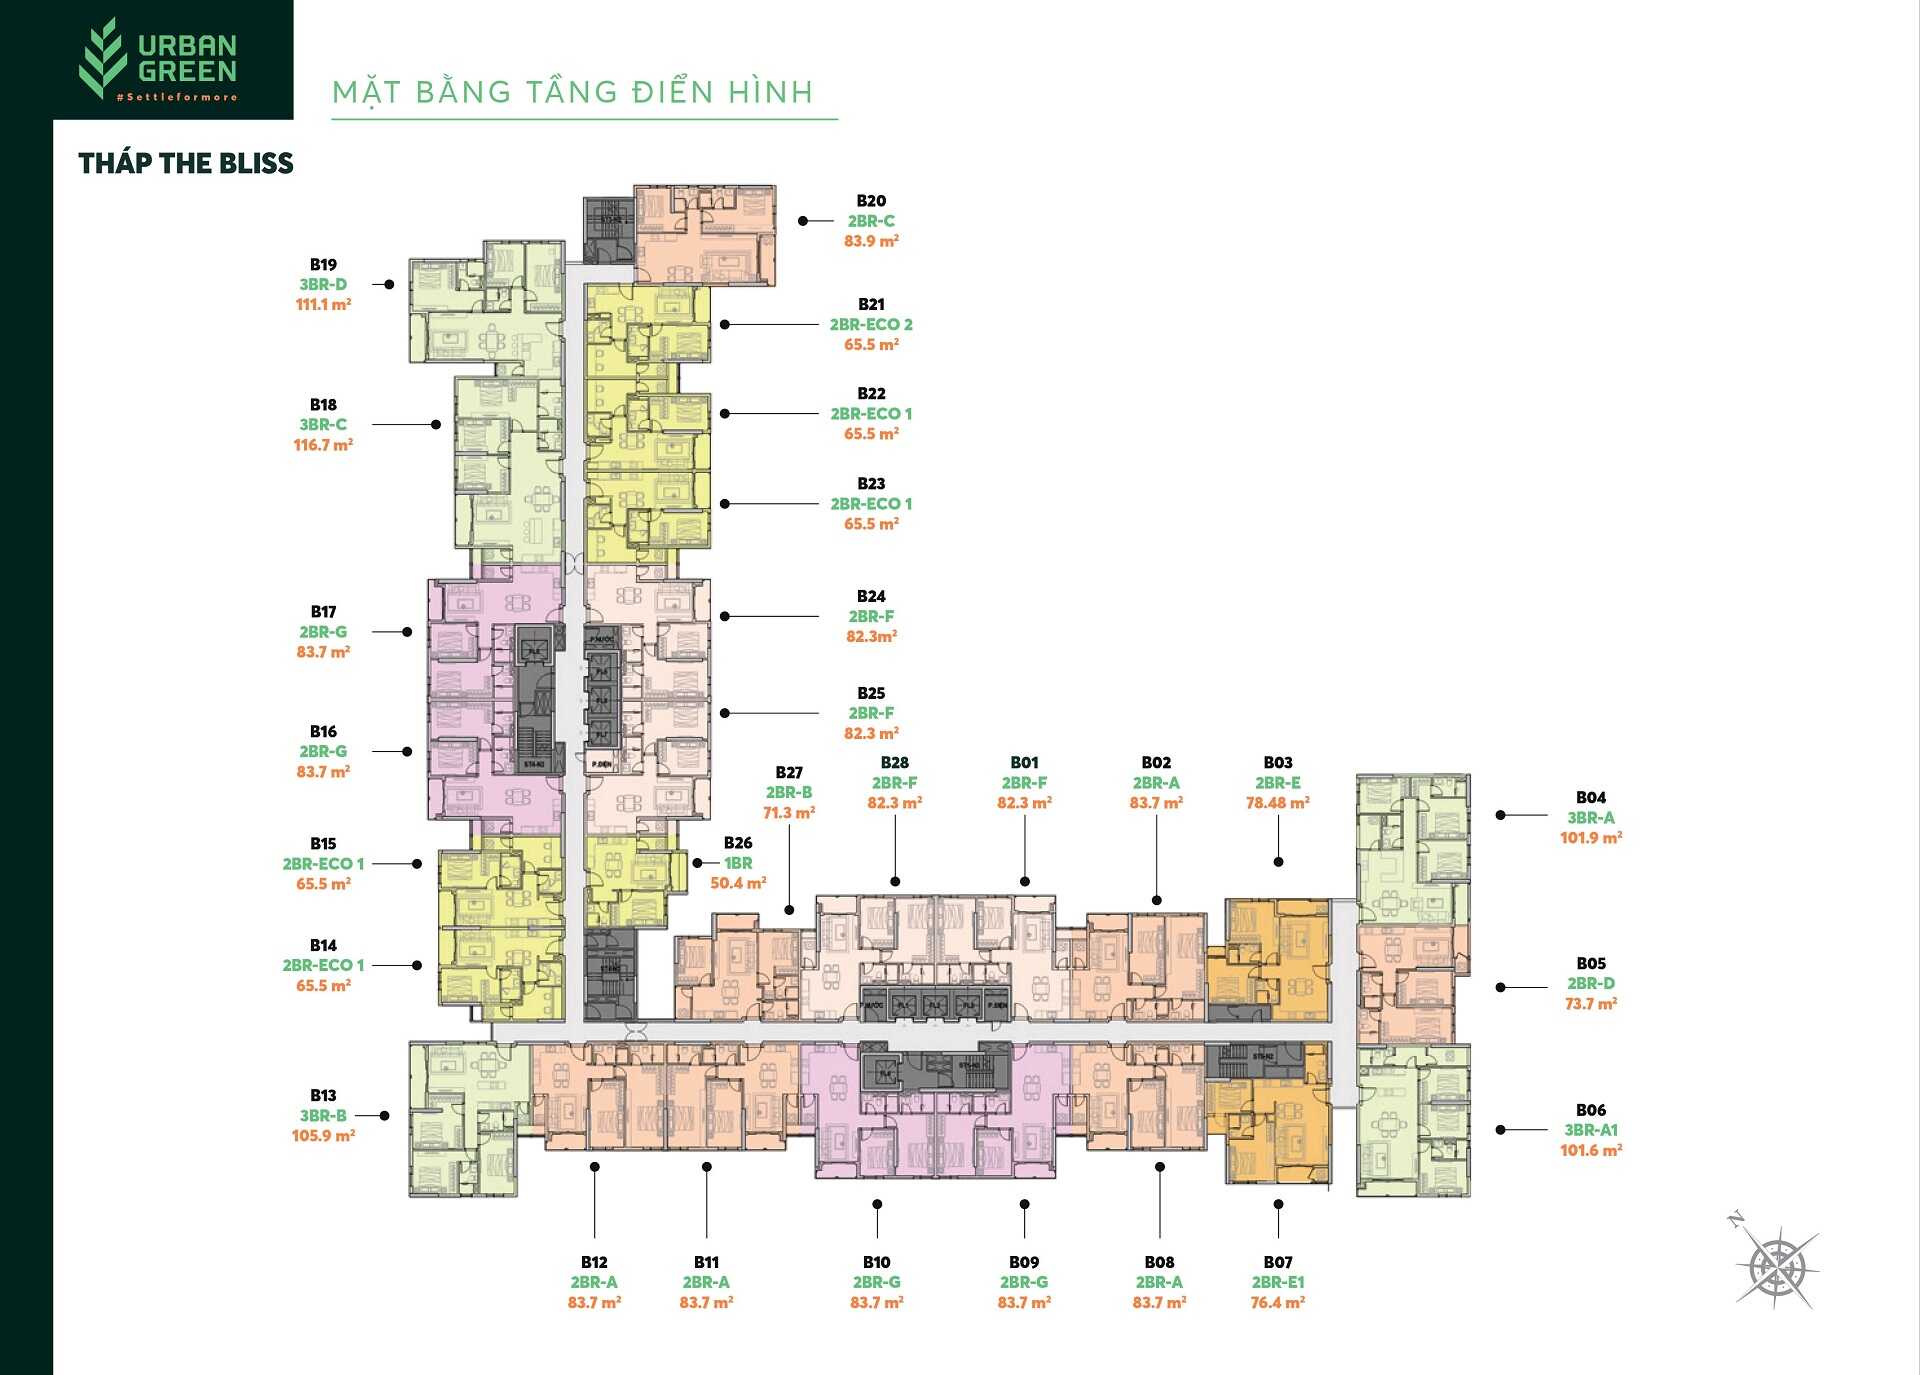 Typical floor plan of The Bliss Urban Green